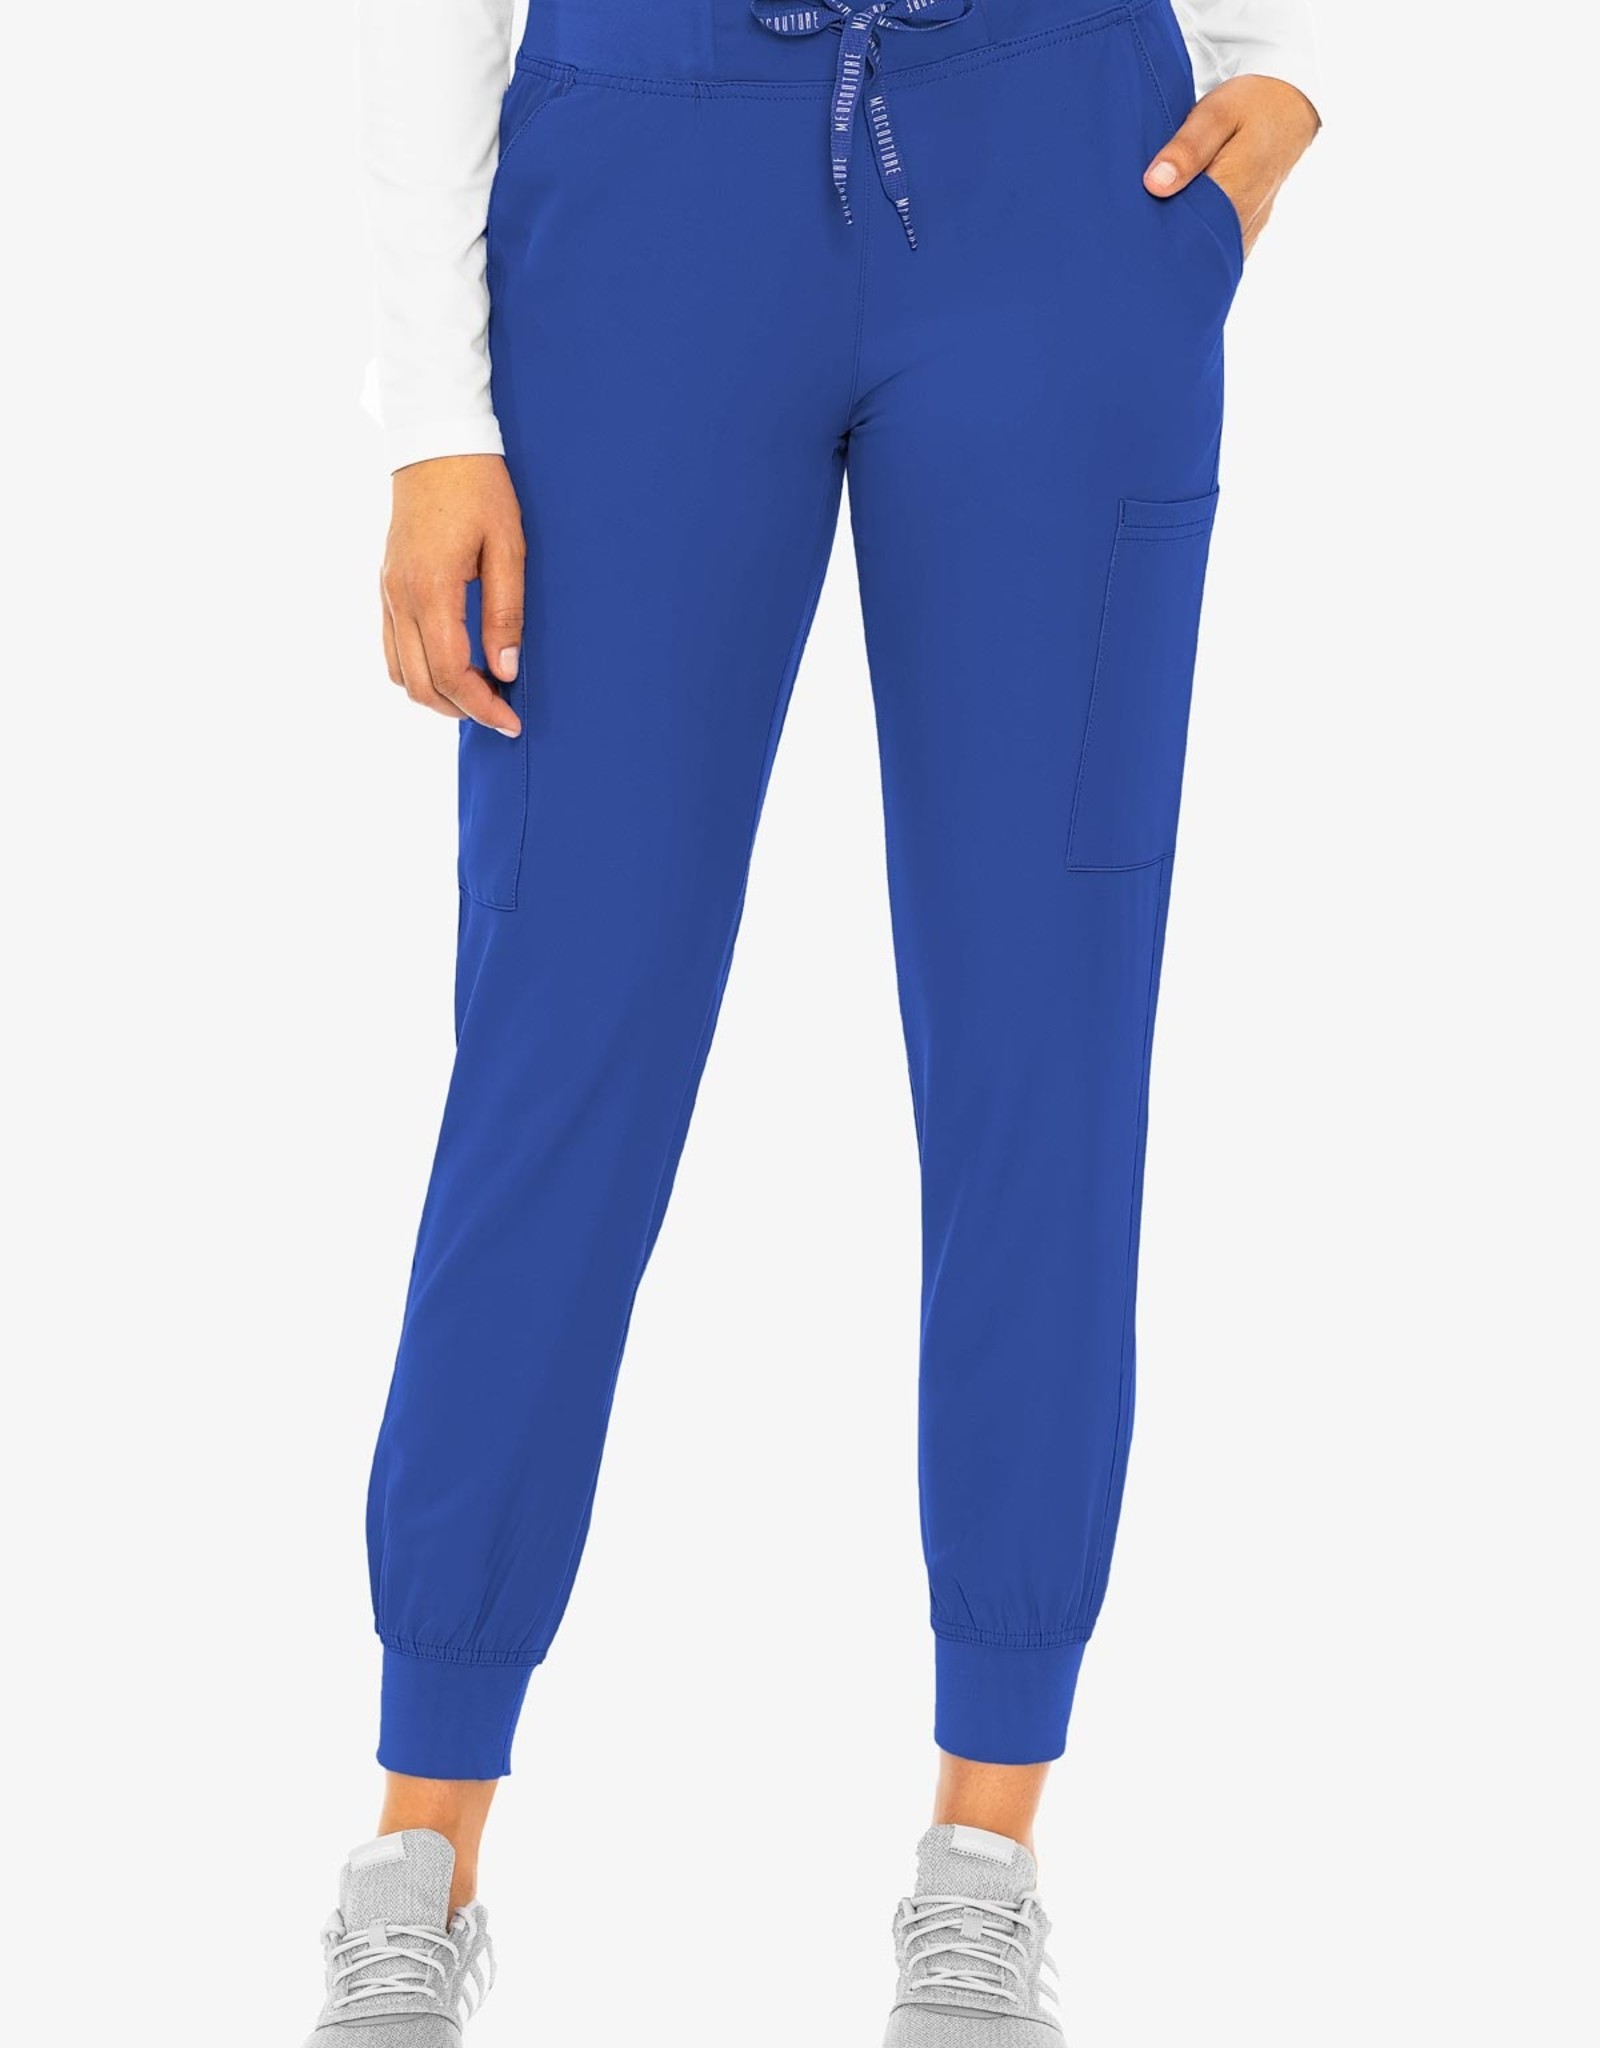 Med Couture Insight Women's Jogger Pant (Petite) - Just Scrubs